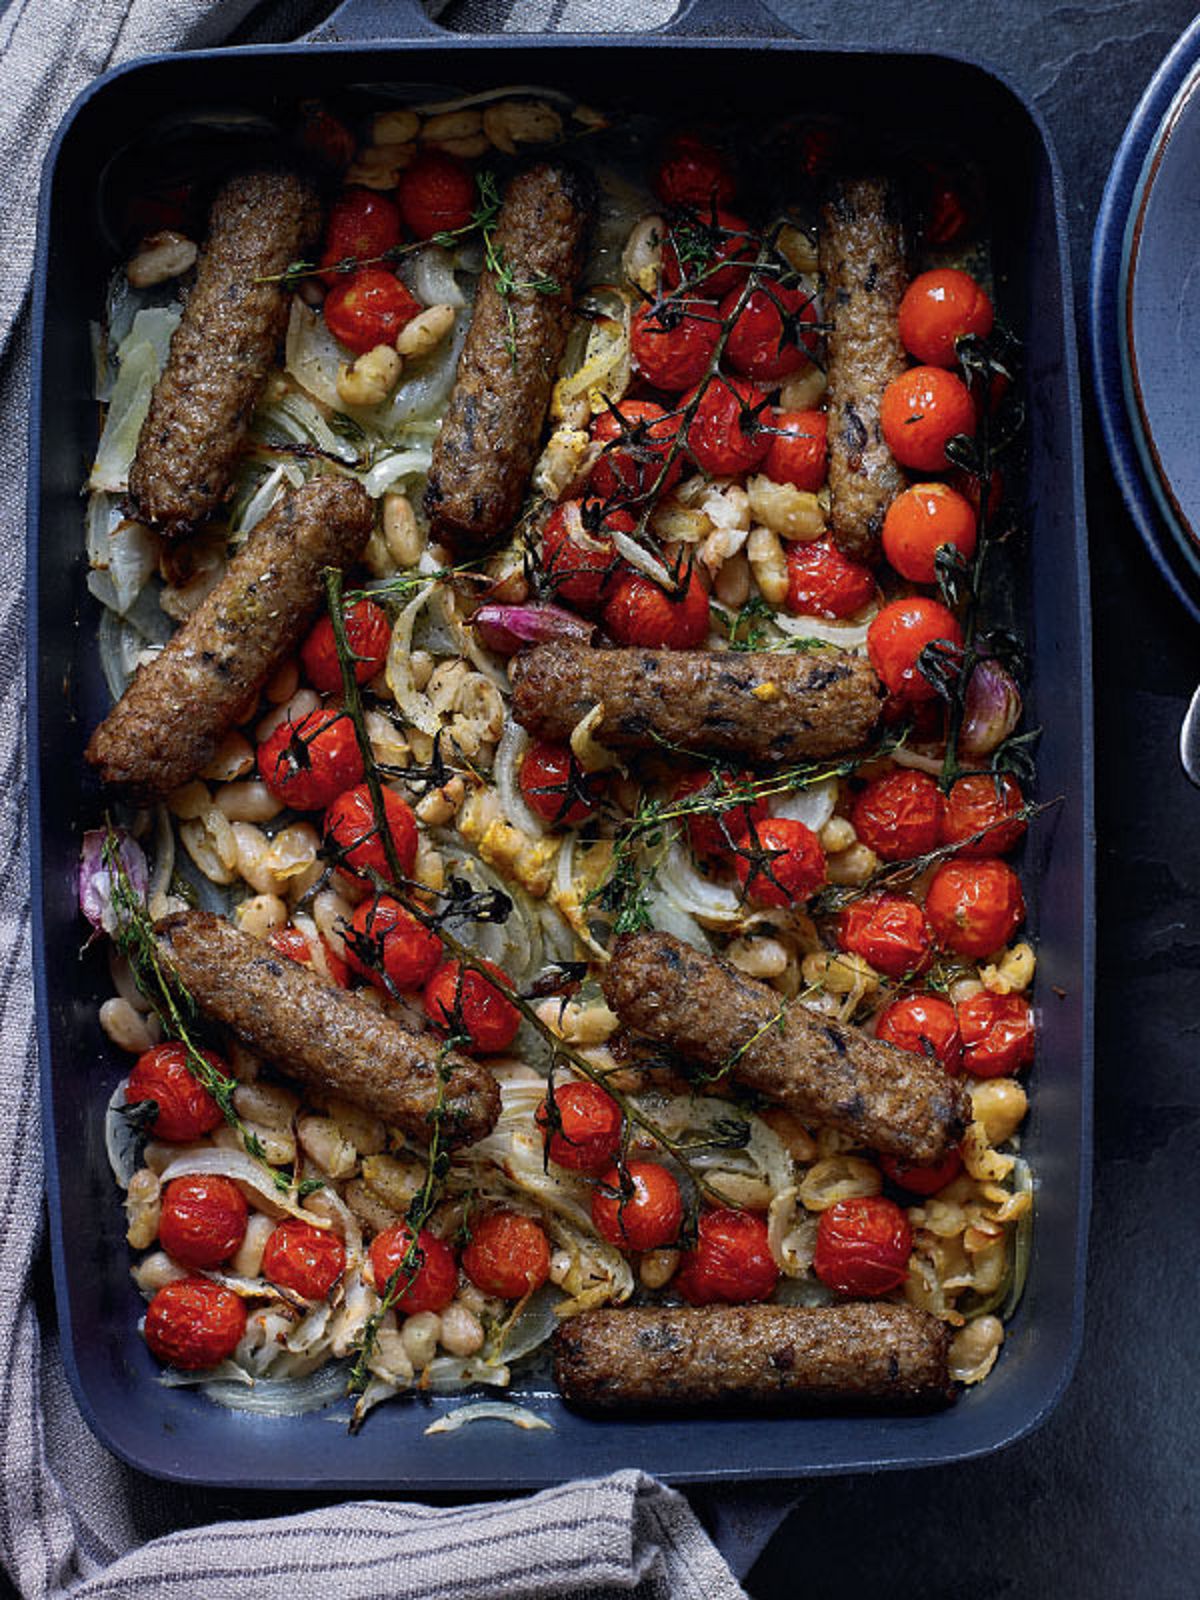 Braised Sausage All-in-one with Cherry Tomatoes, Cannellini Beans and Cider